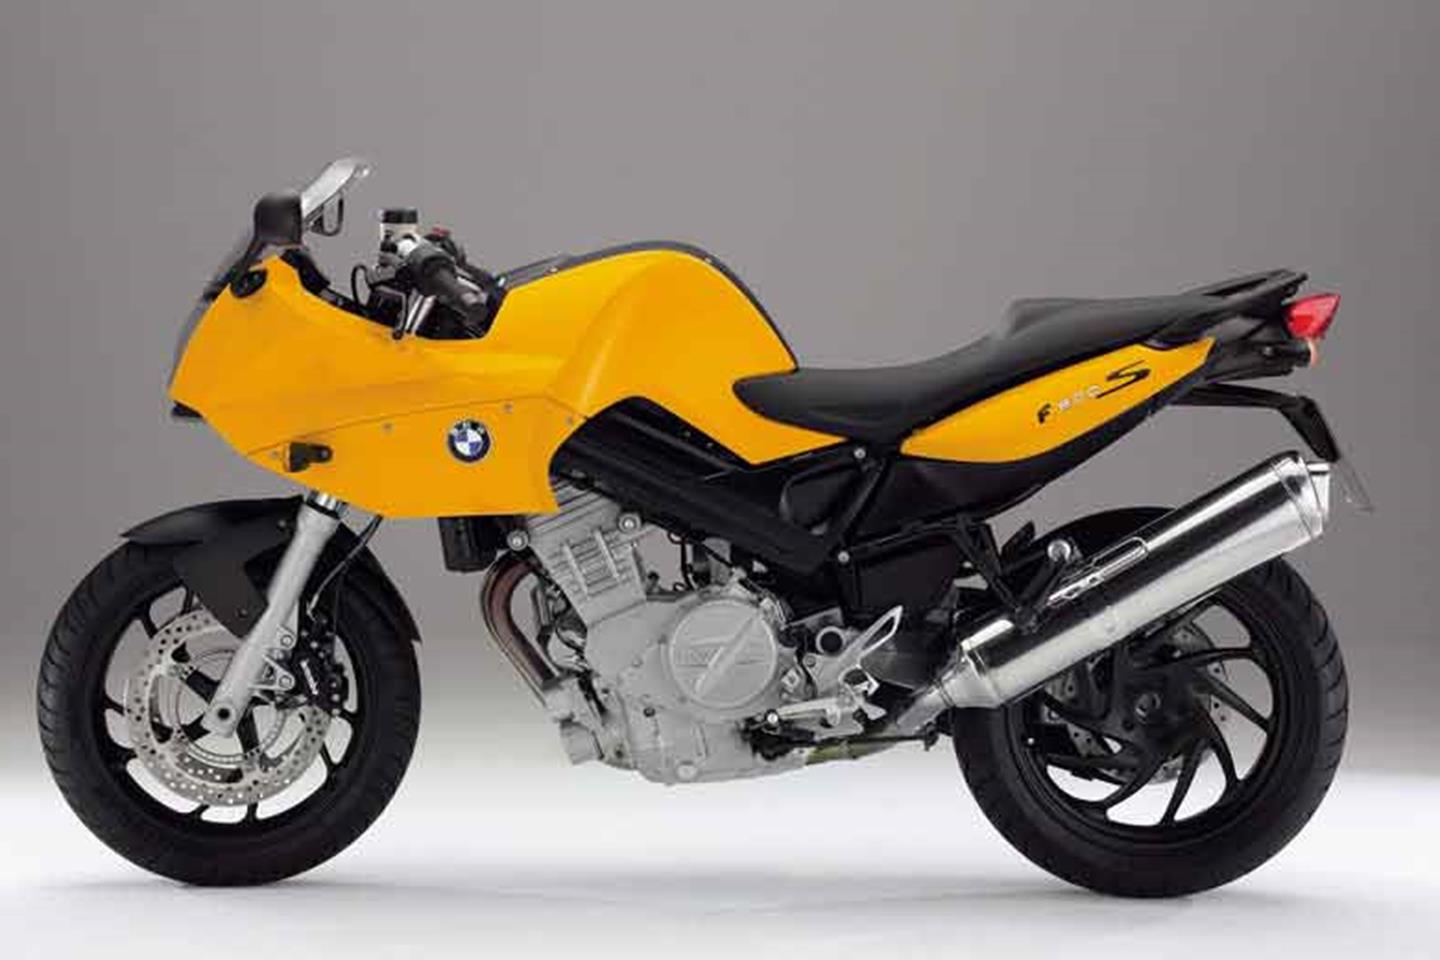 BMW F800S (2006-2010) Review | Speed, Specs & Prices